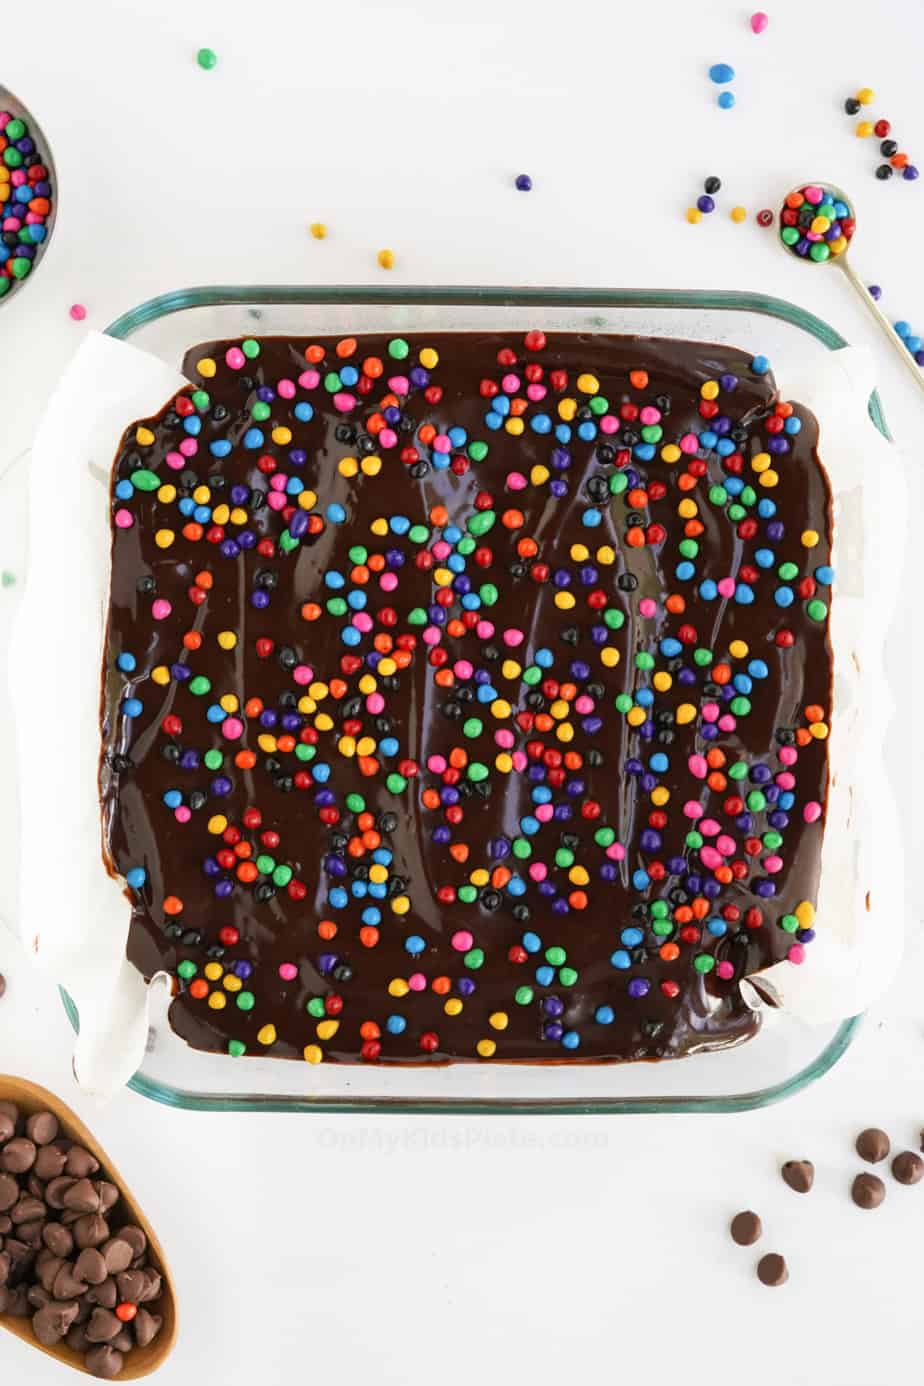 Chocolate brownies in the pan from overhead covered in chocolate frosting and rainbow crunch sprinkles.